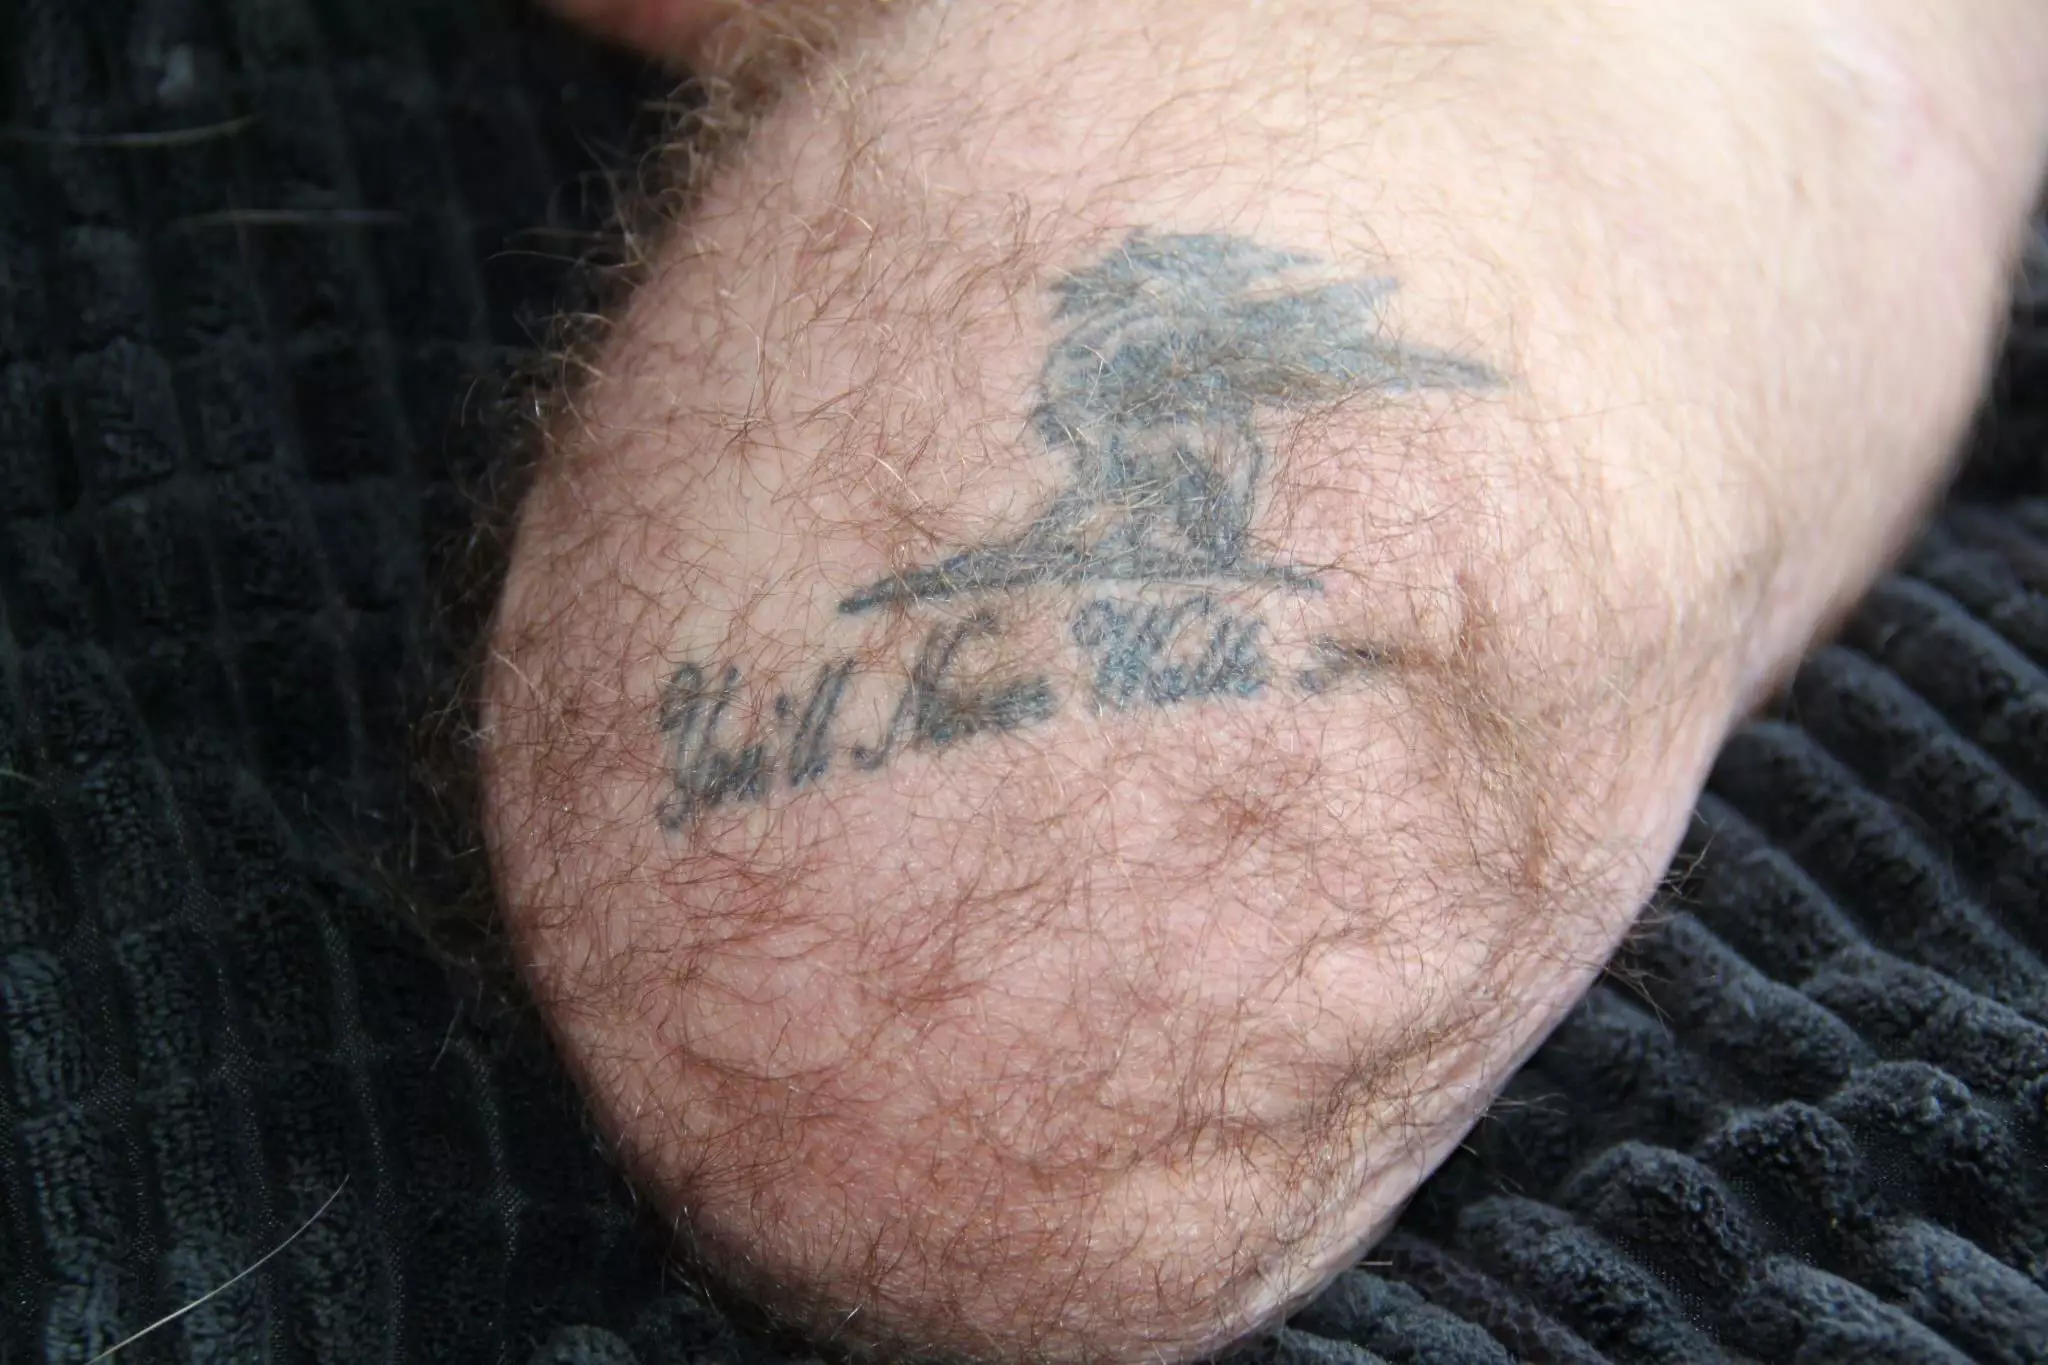 Andy says he was left with an 'unusual tattoo'.